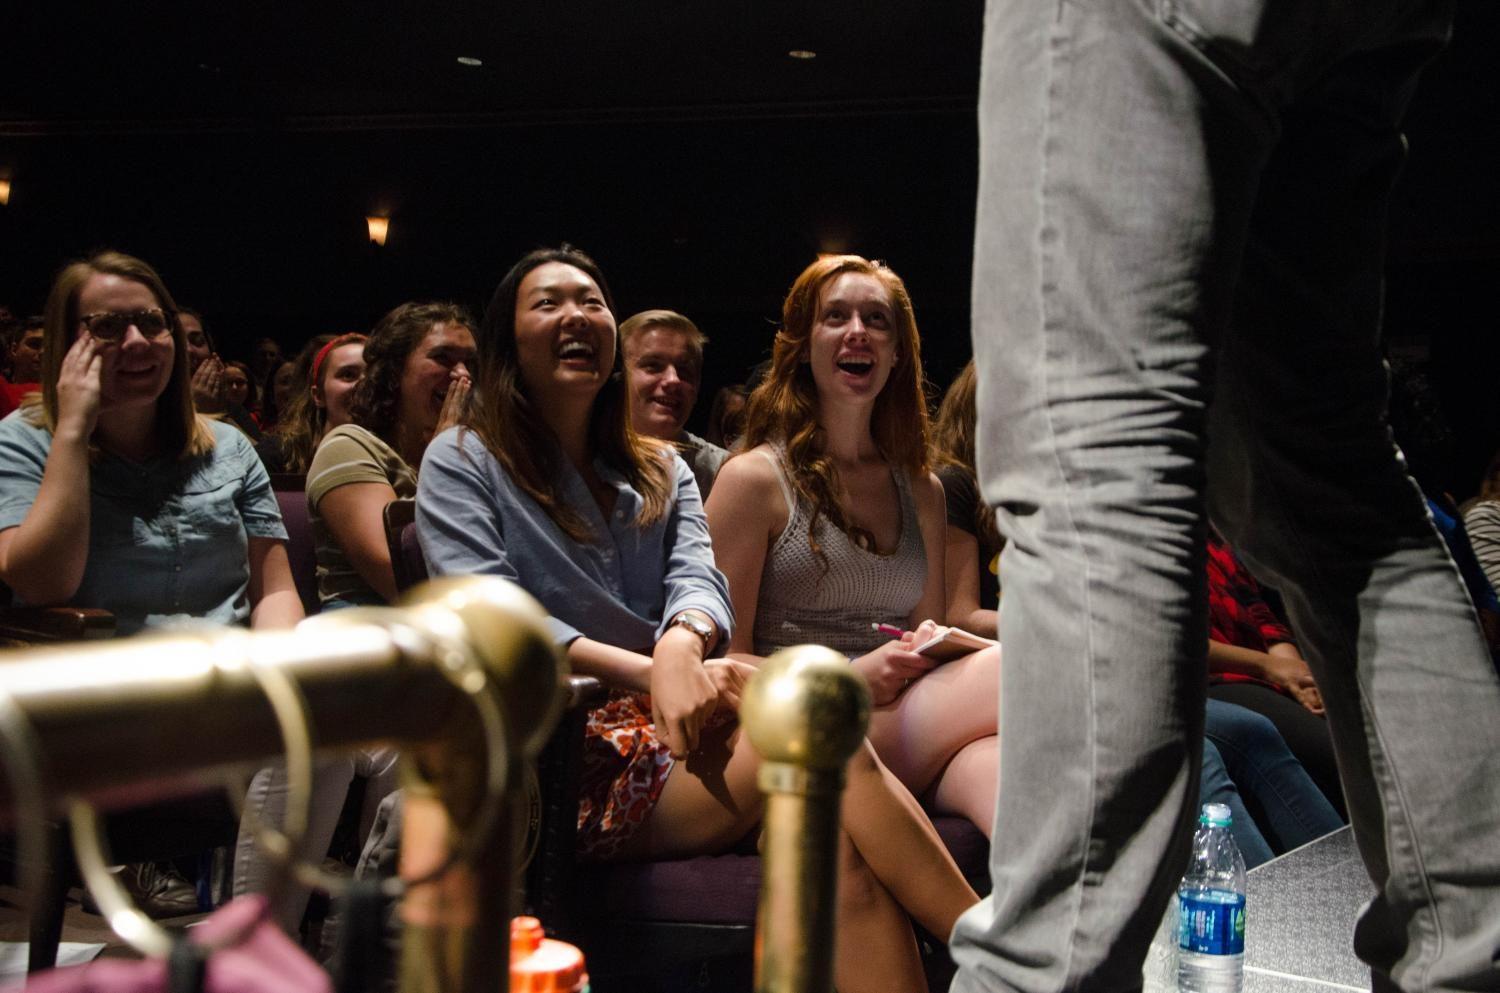 University of Iowa students laugh in wonder as magician Nate Staniforth drinks the ashes of a dollar bill as a part of a trick on Sept. 11 at the Englert Theatre. 